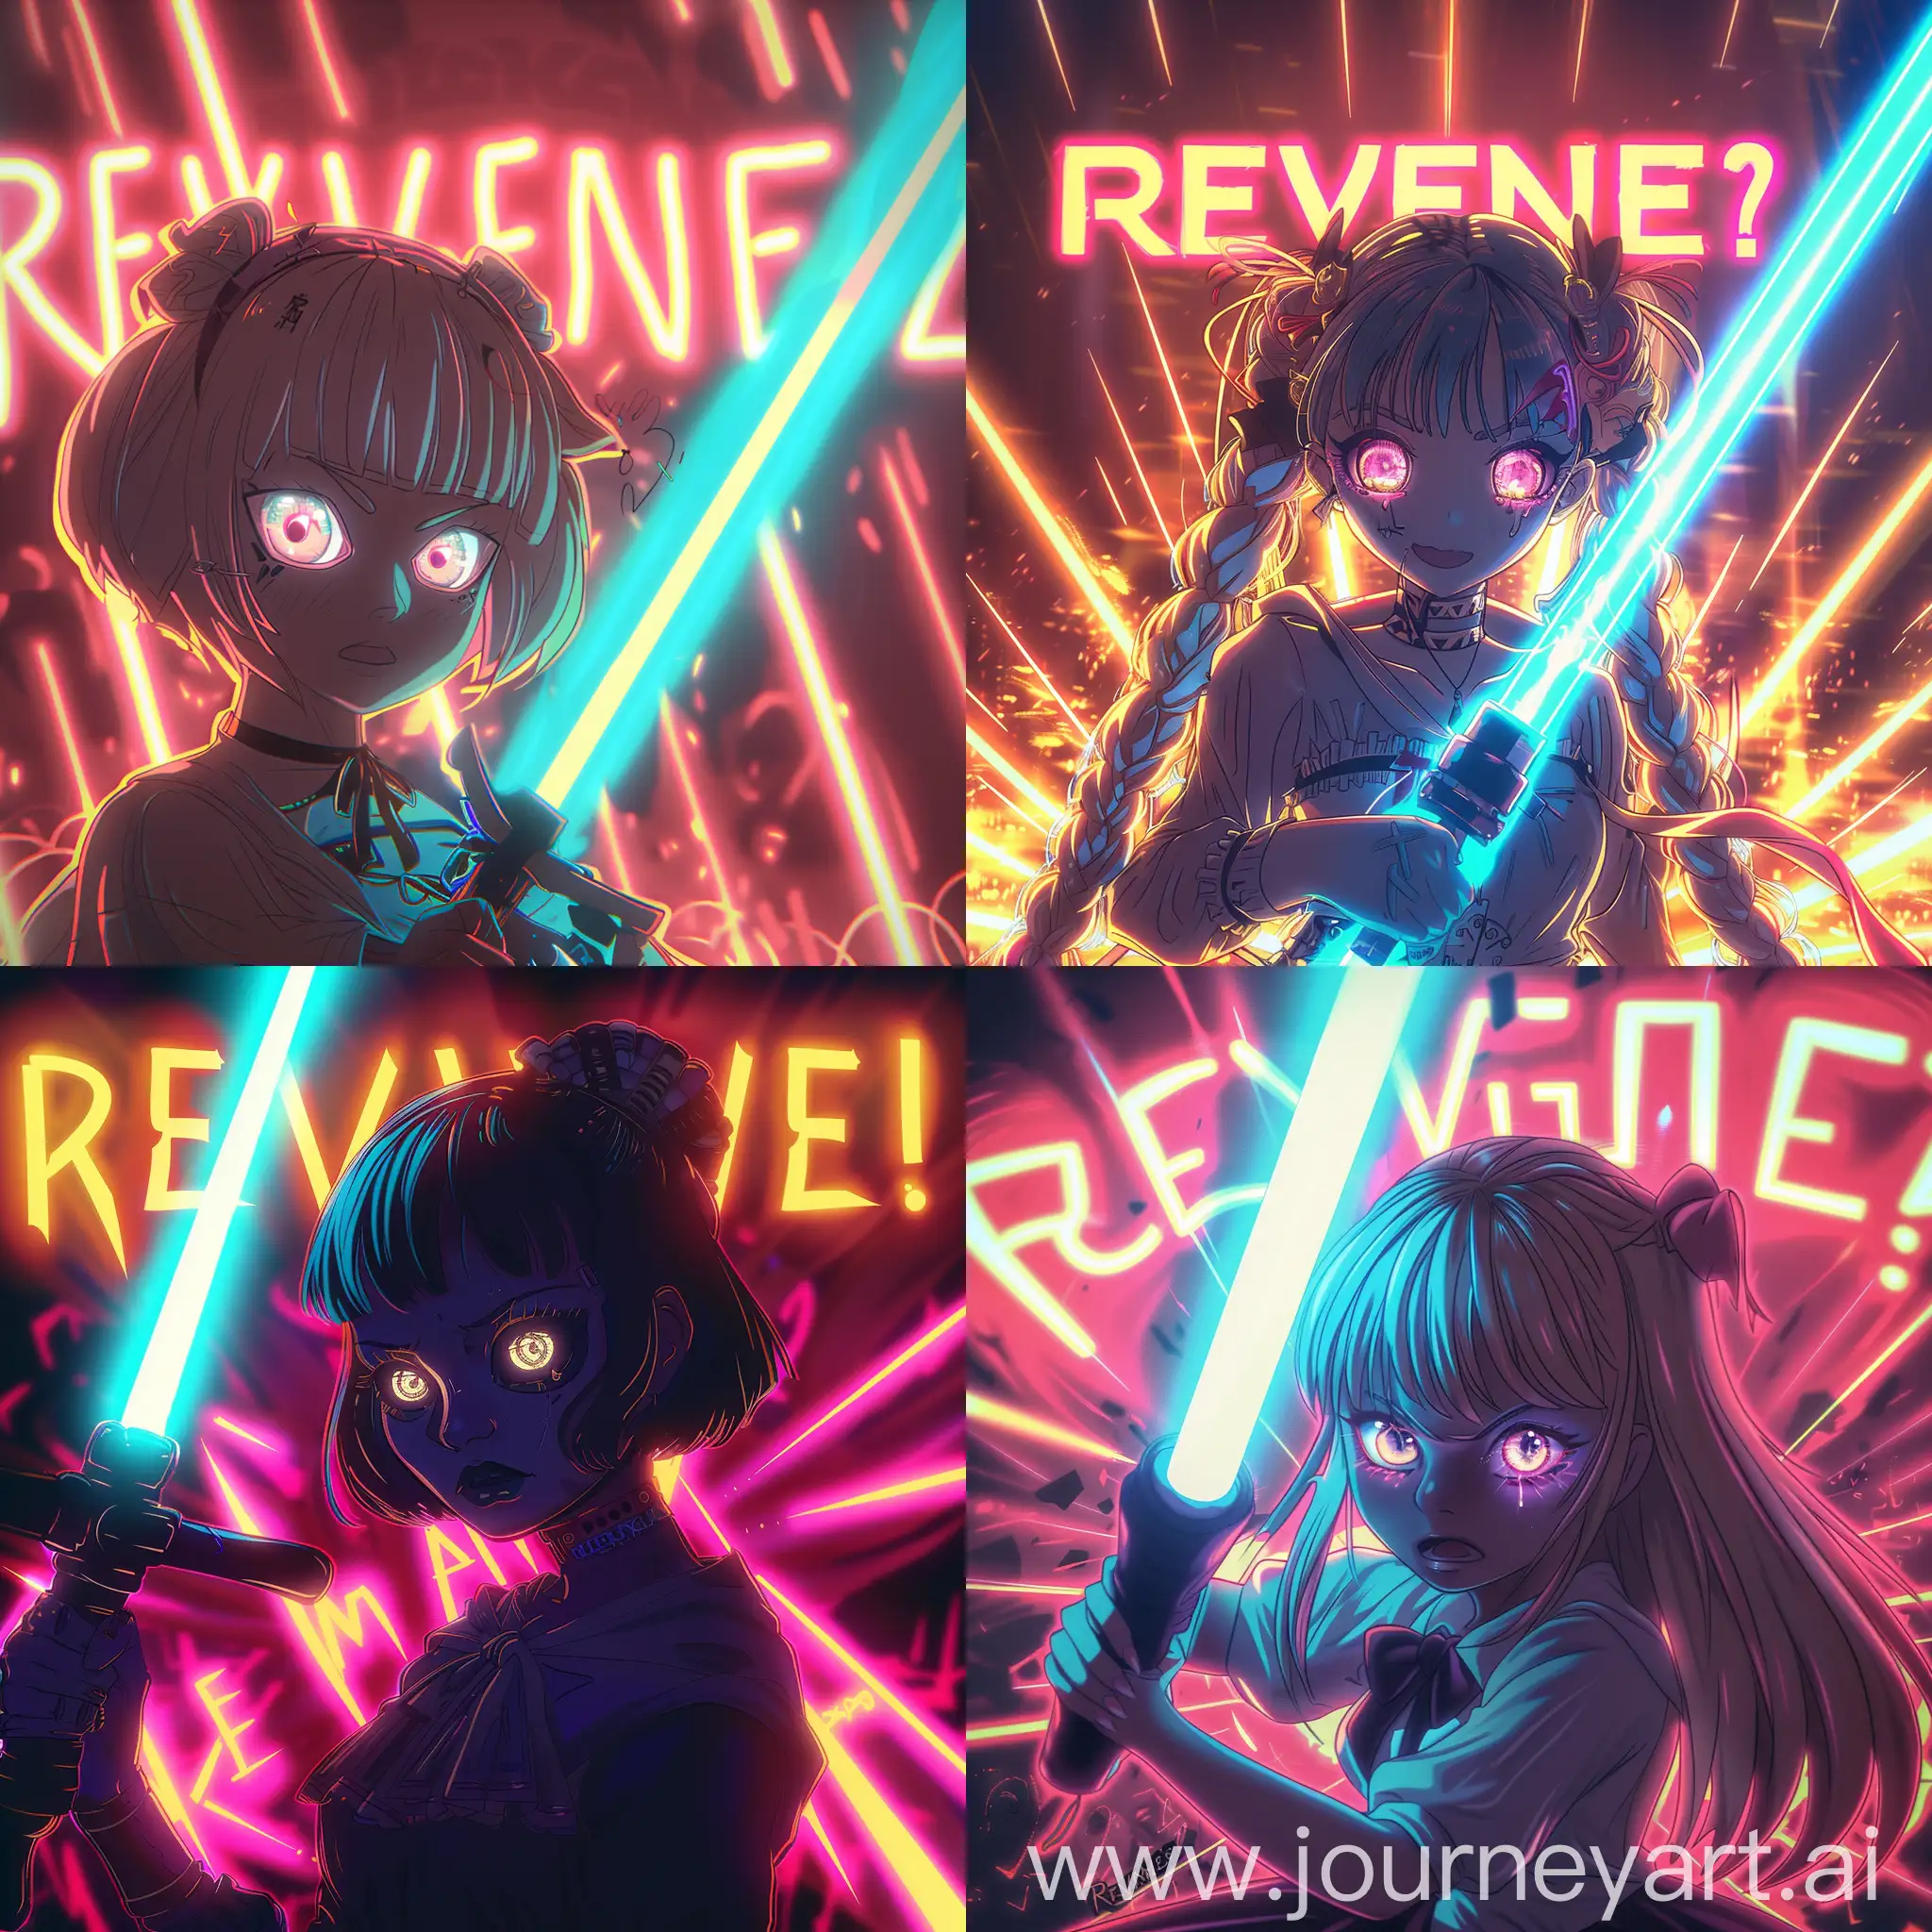 draw a phonk-themed girl, her eyes are glowing, a bright neon light background, she holds a saber in her hand, the inscription behind the background is REVENGE?!